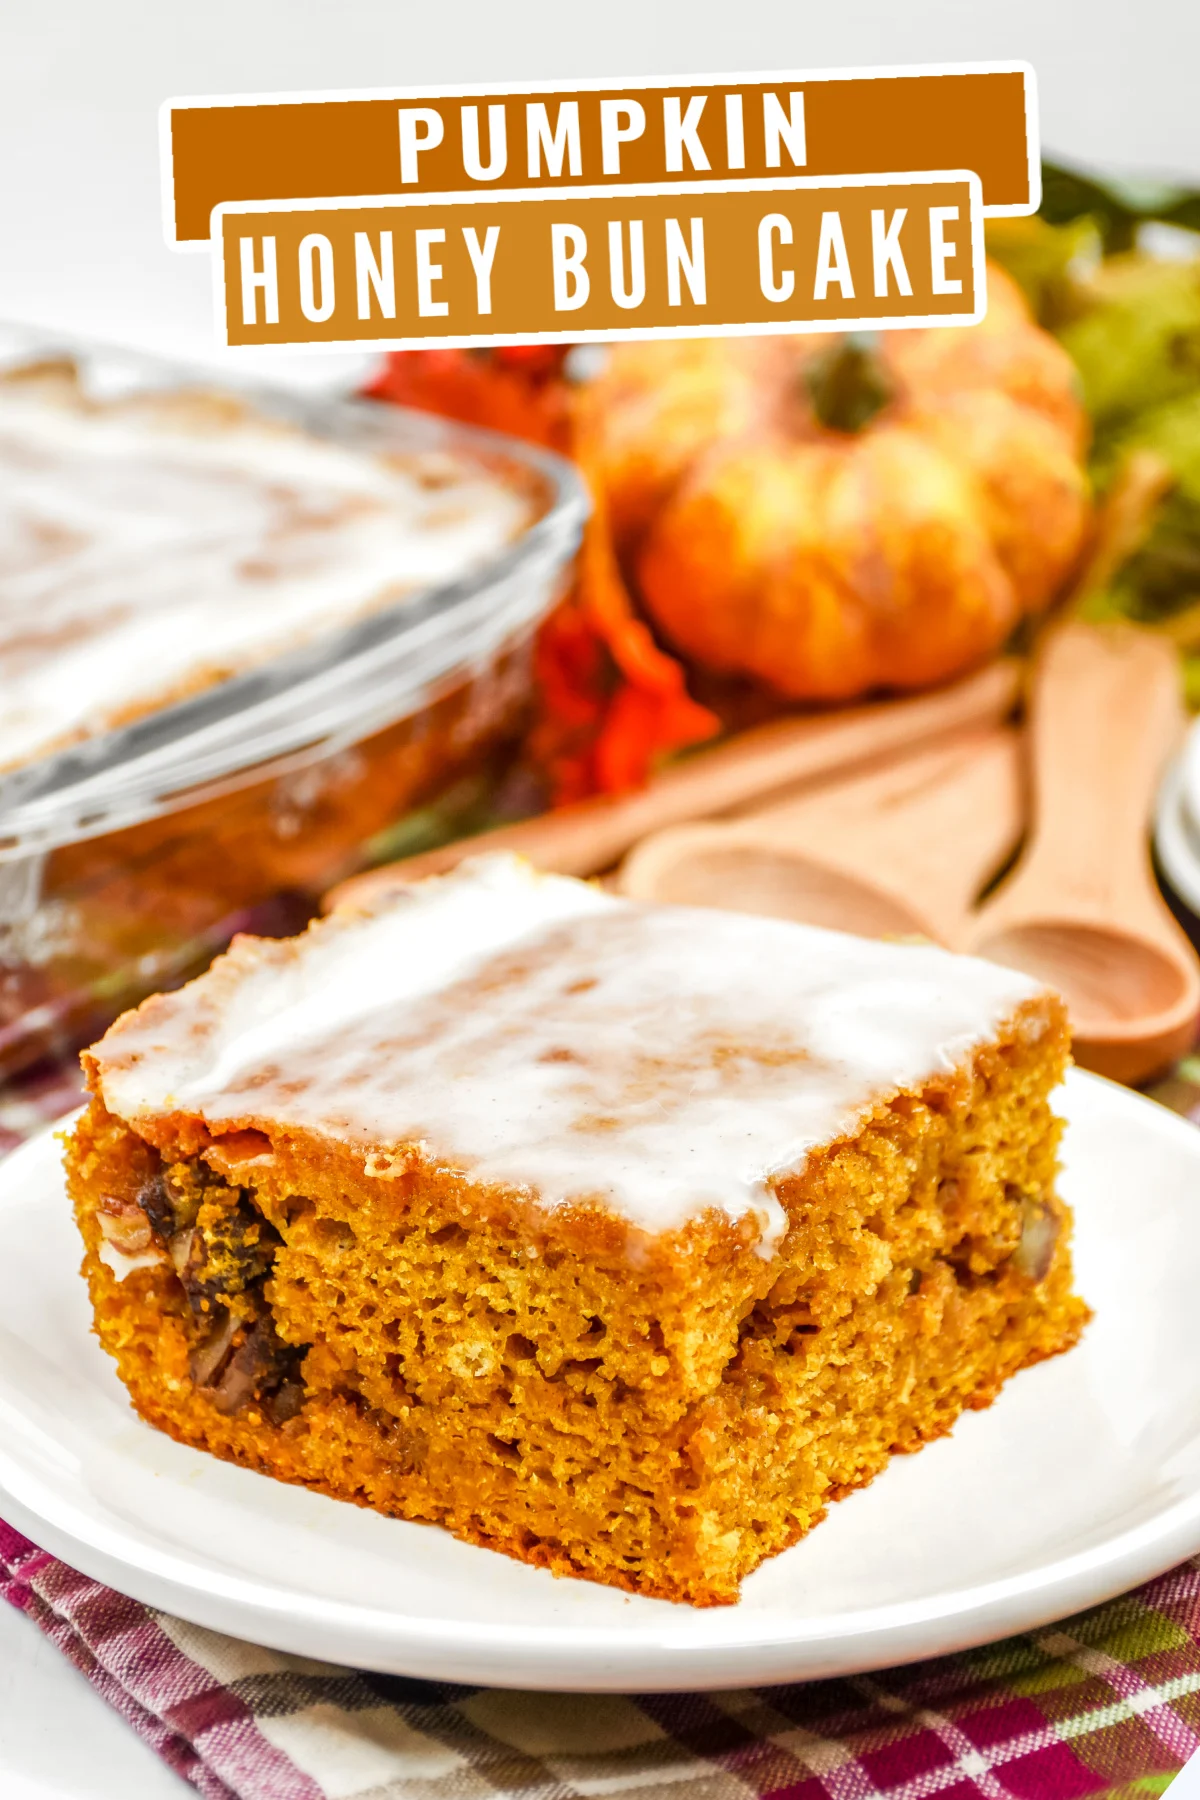 This pumpkin honey bun cake recipe is not only sweet and delicious, but also super moist. It may be hard to share this delicious fall treat!